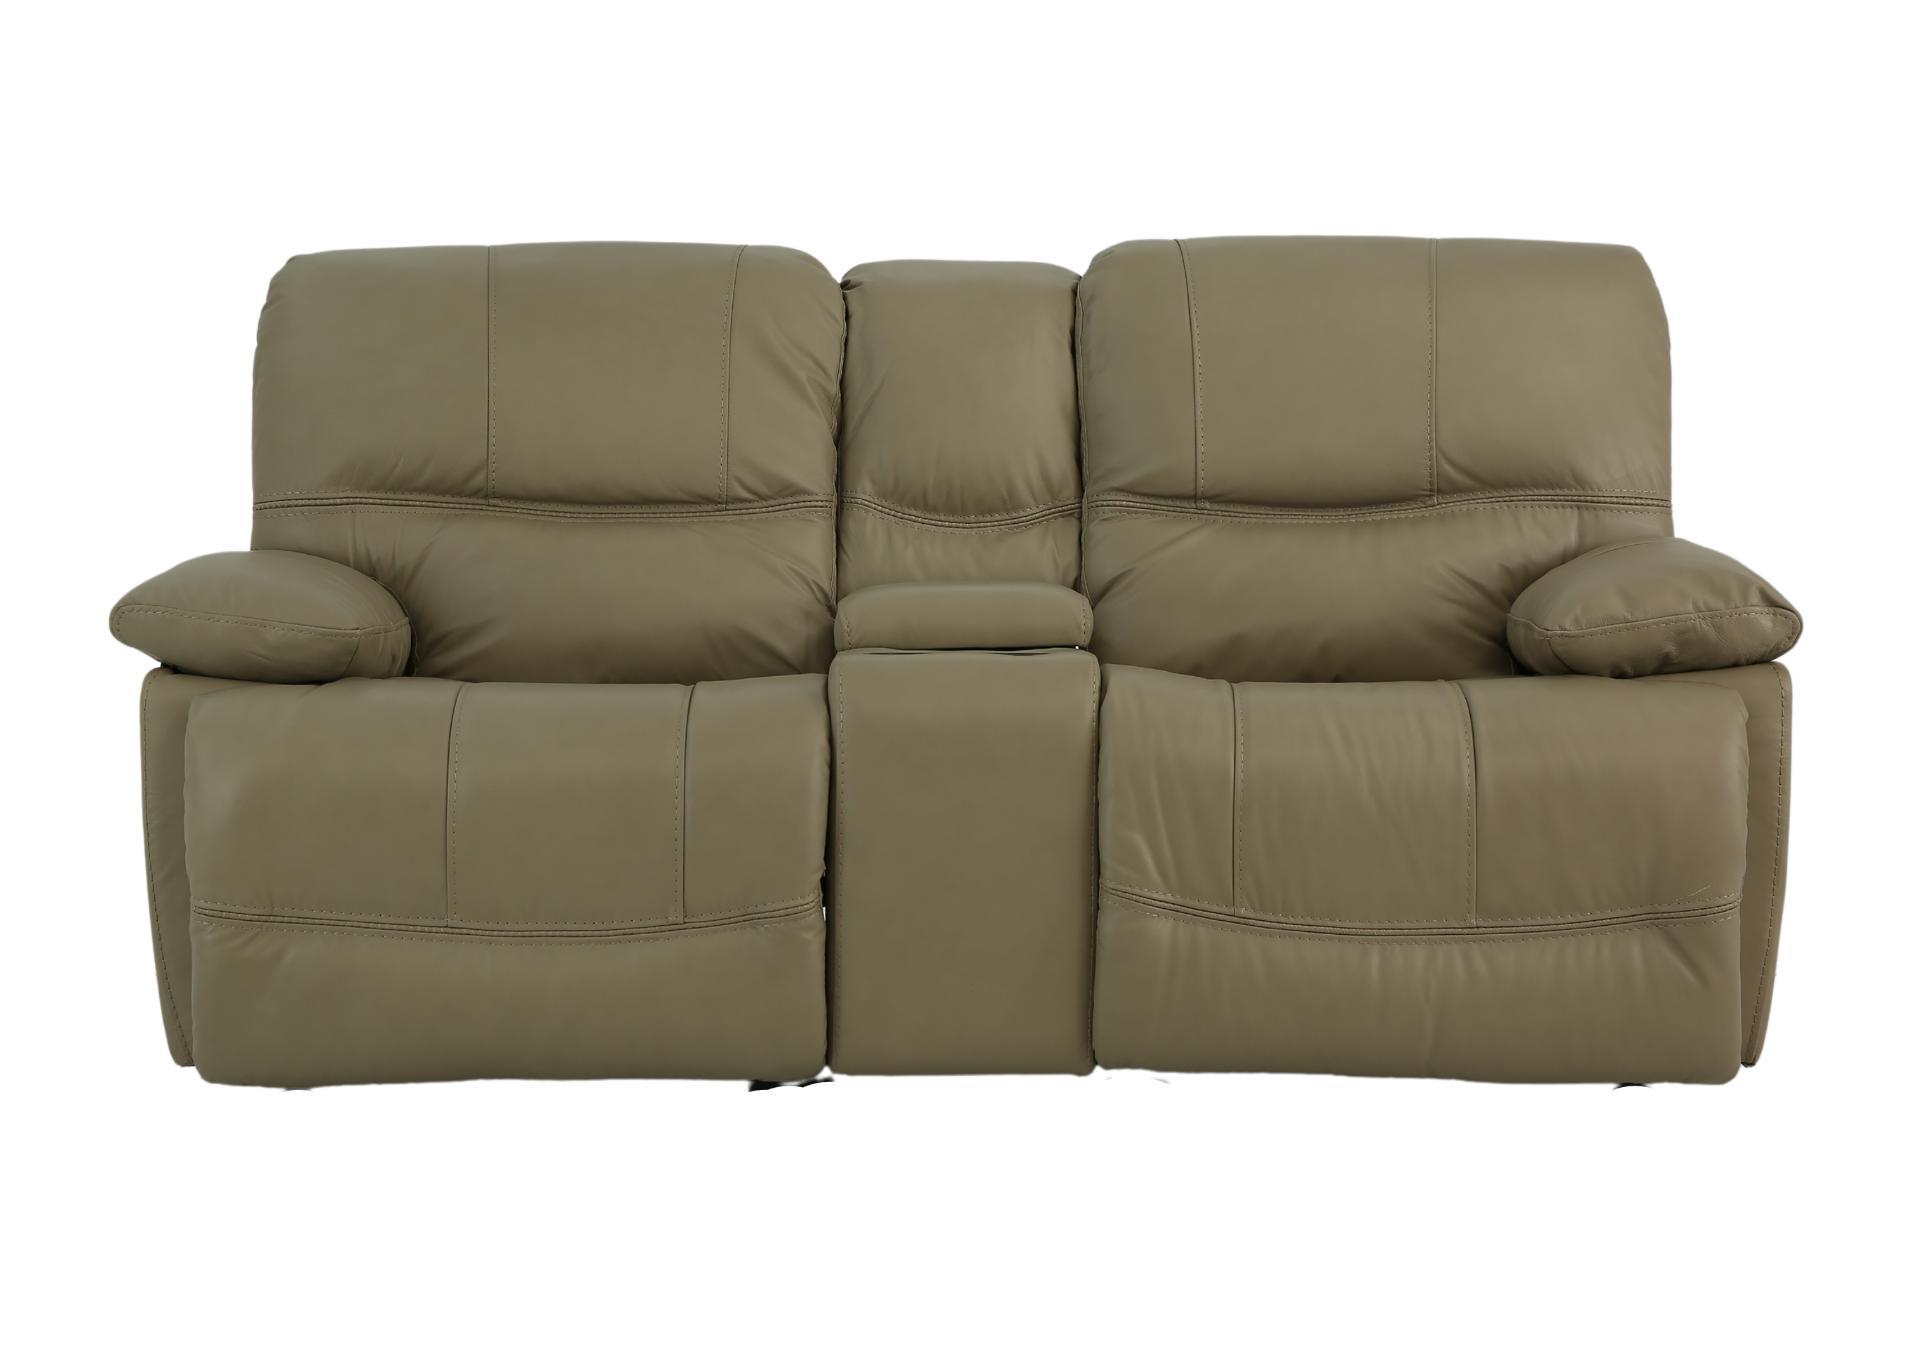 ODESSA TAUPE LEATHER 1P POWER ZERO GRAVITY RECLINING LOVESEAT WITH CONSOLE,CHEERS